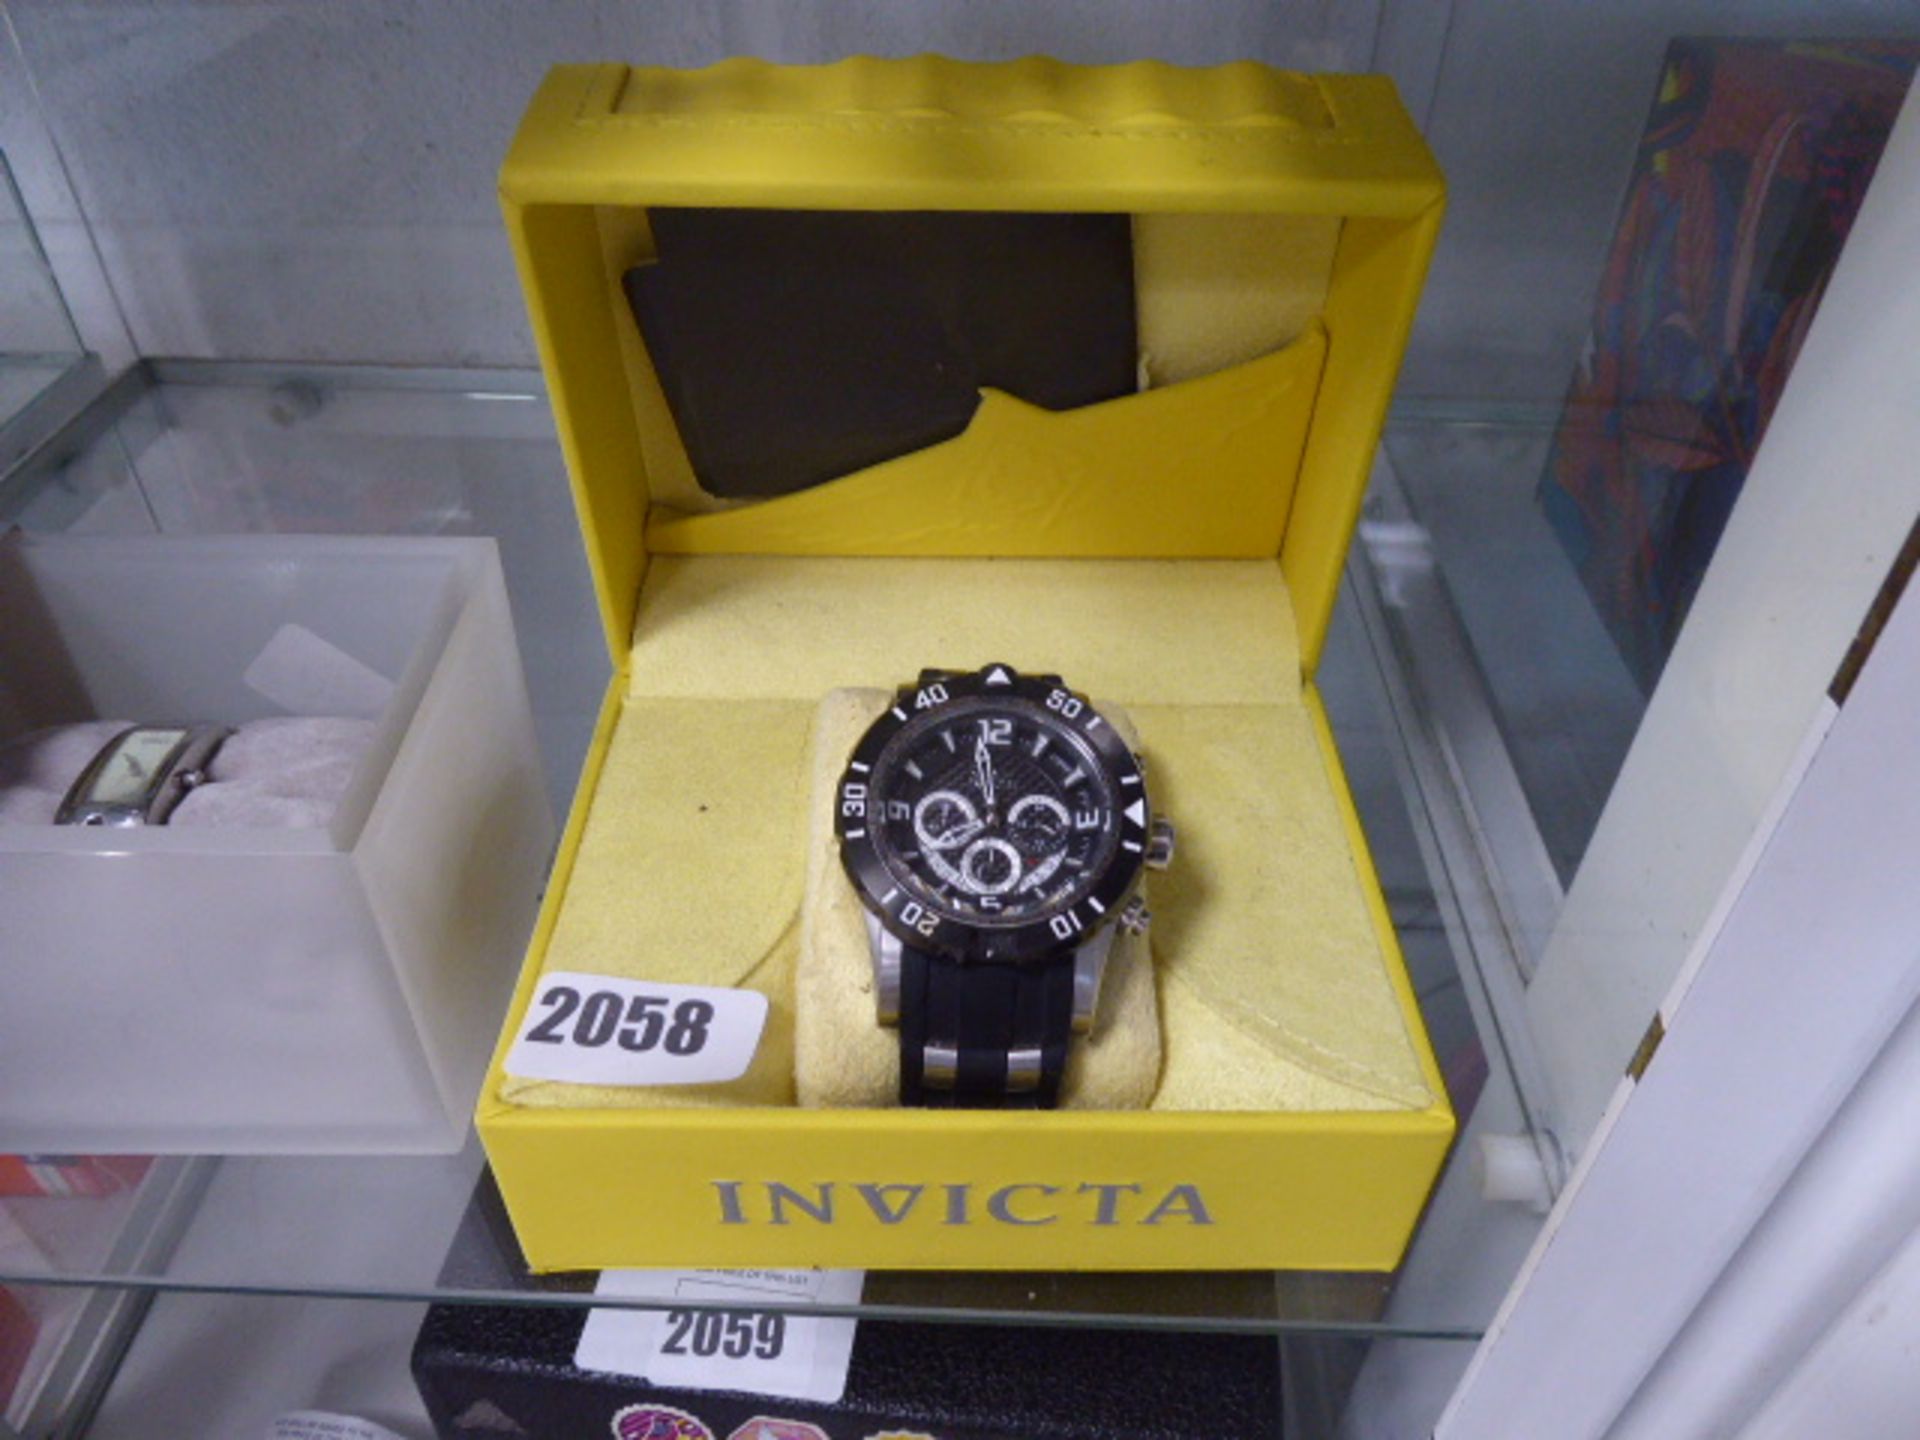 Invicta oversized wrist watch with rubberized strap and box